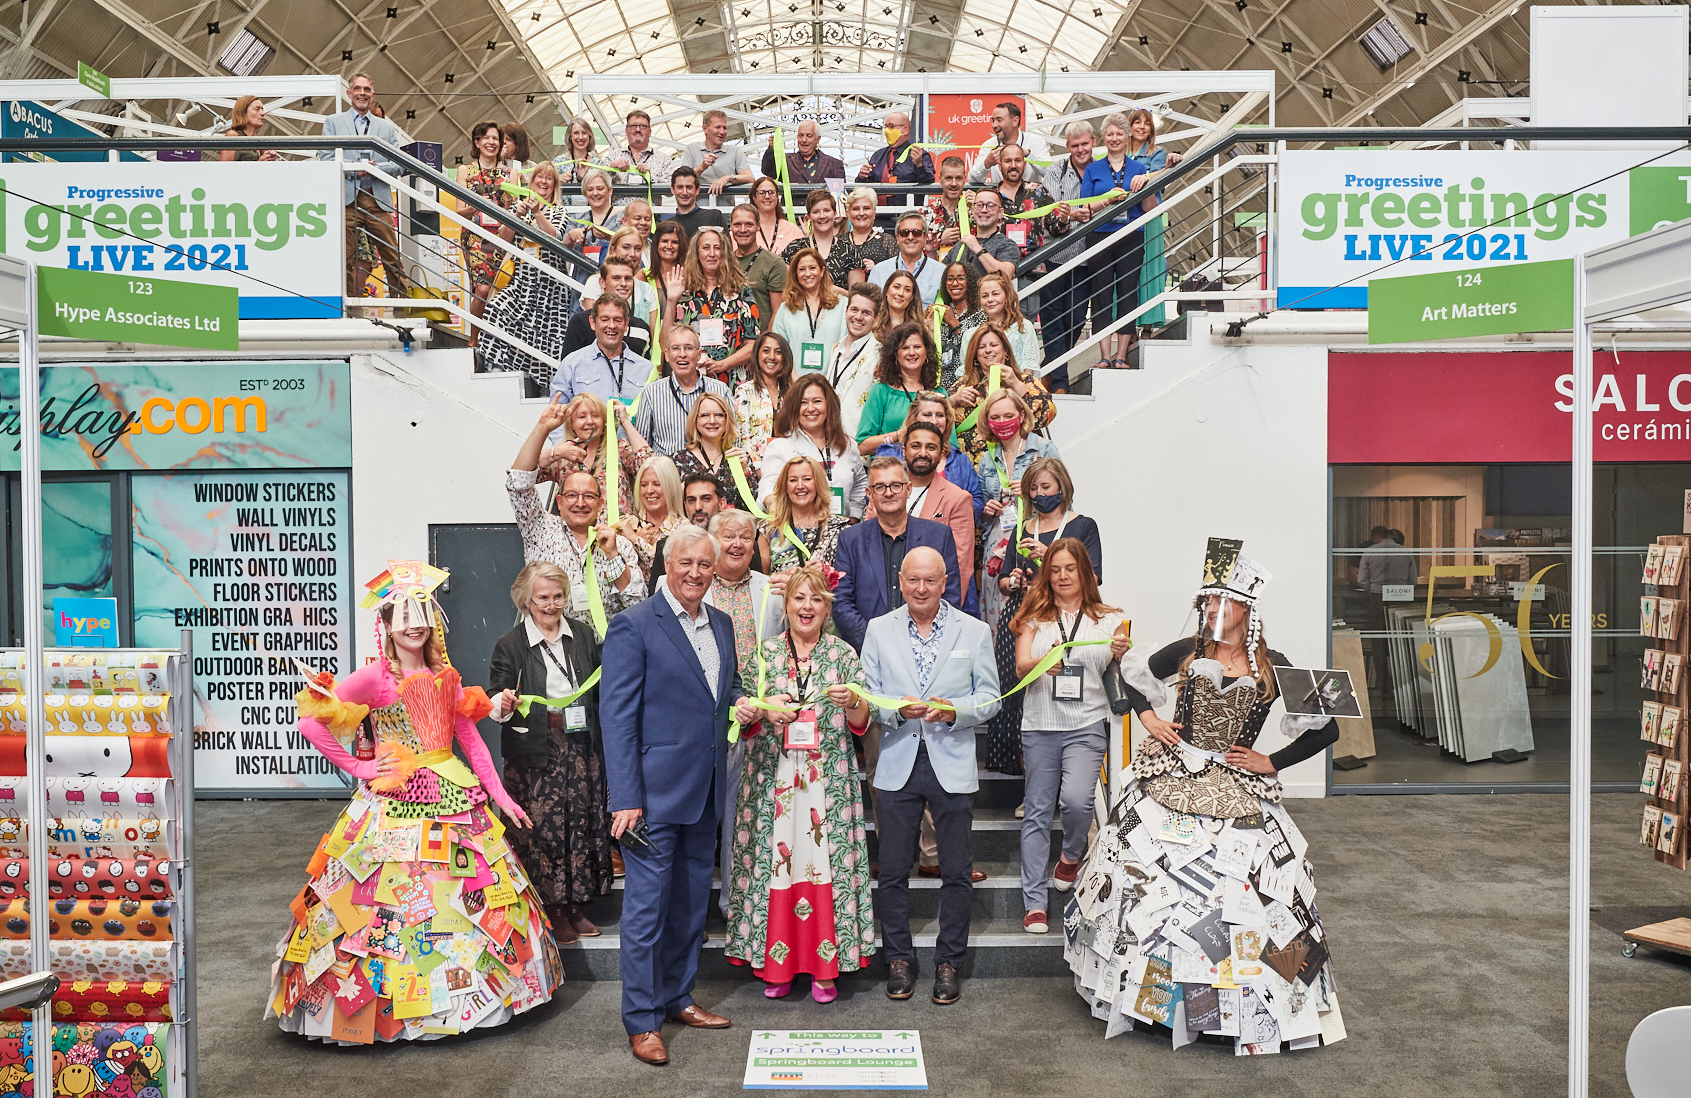 Above: Show stoppers – the opening day of PG Live 2021